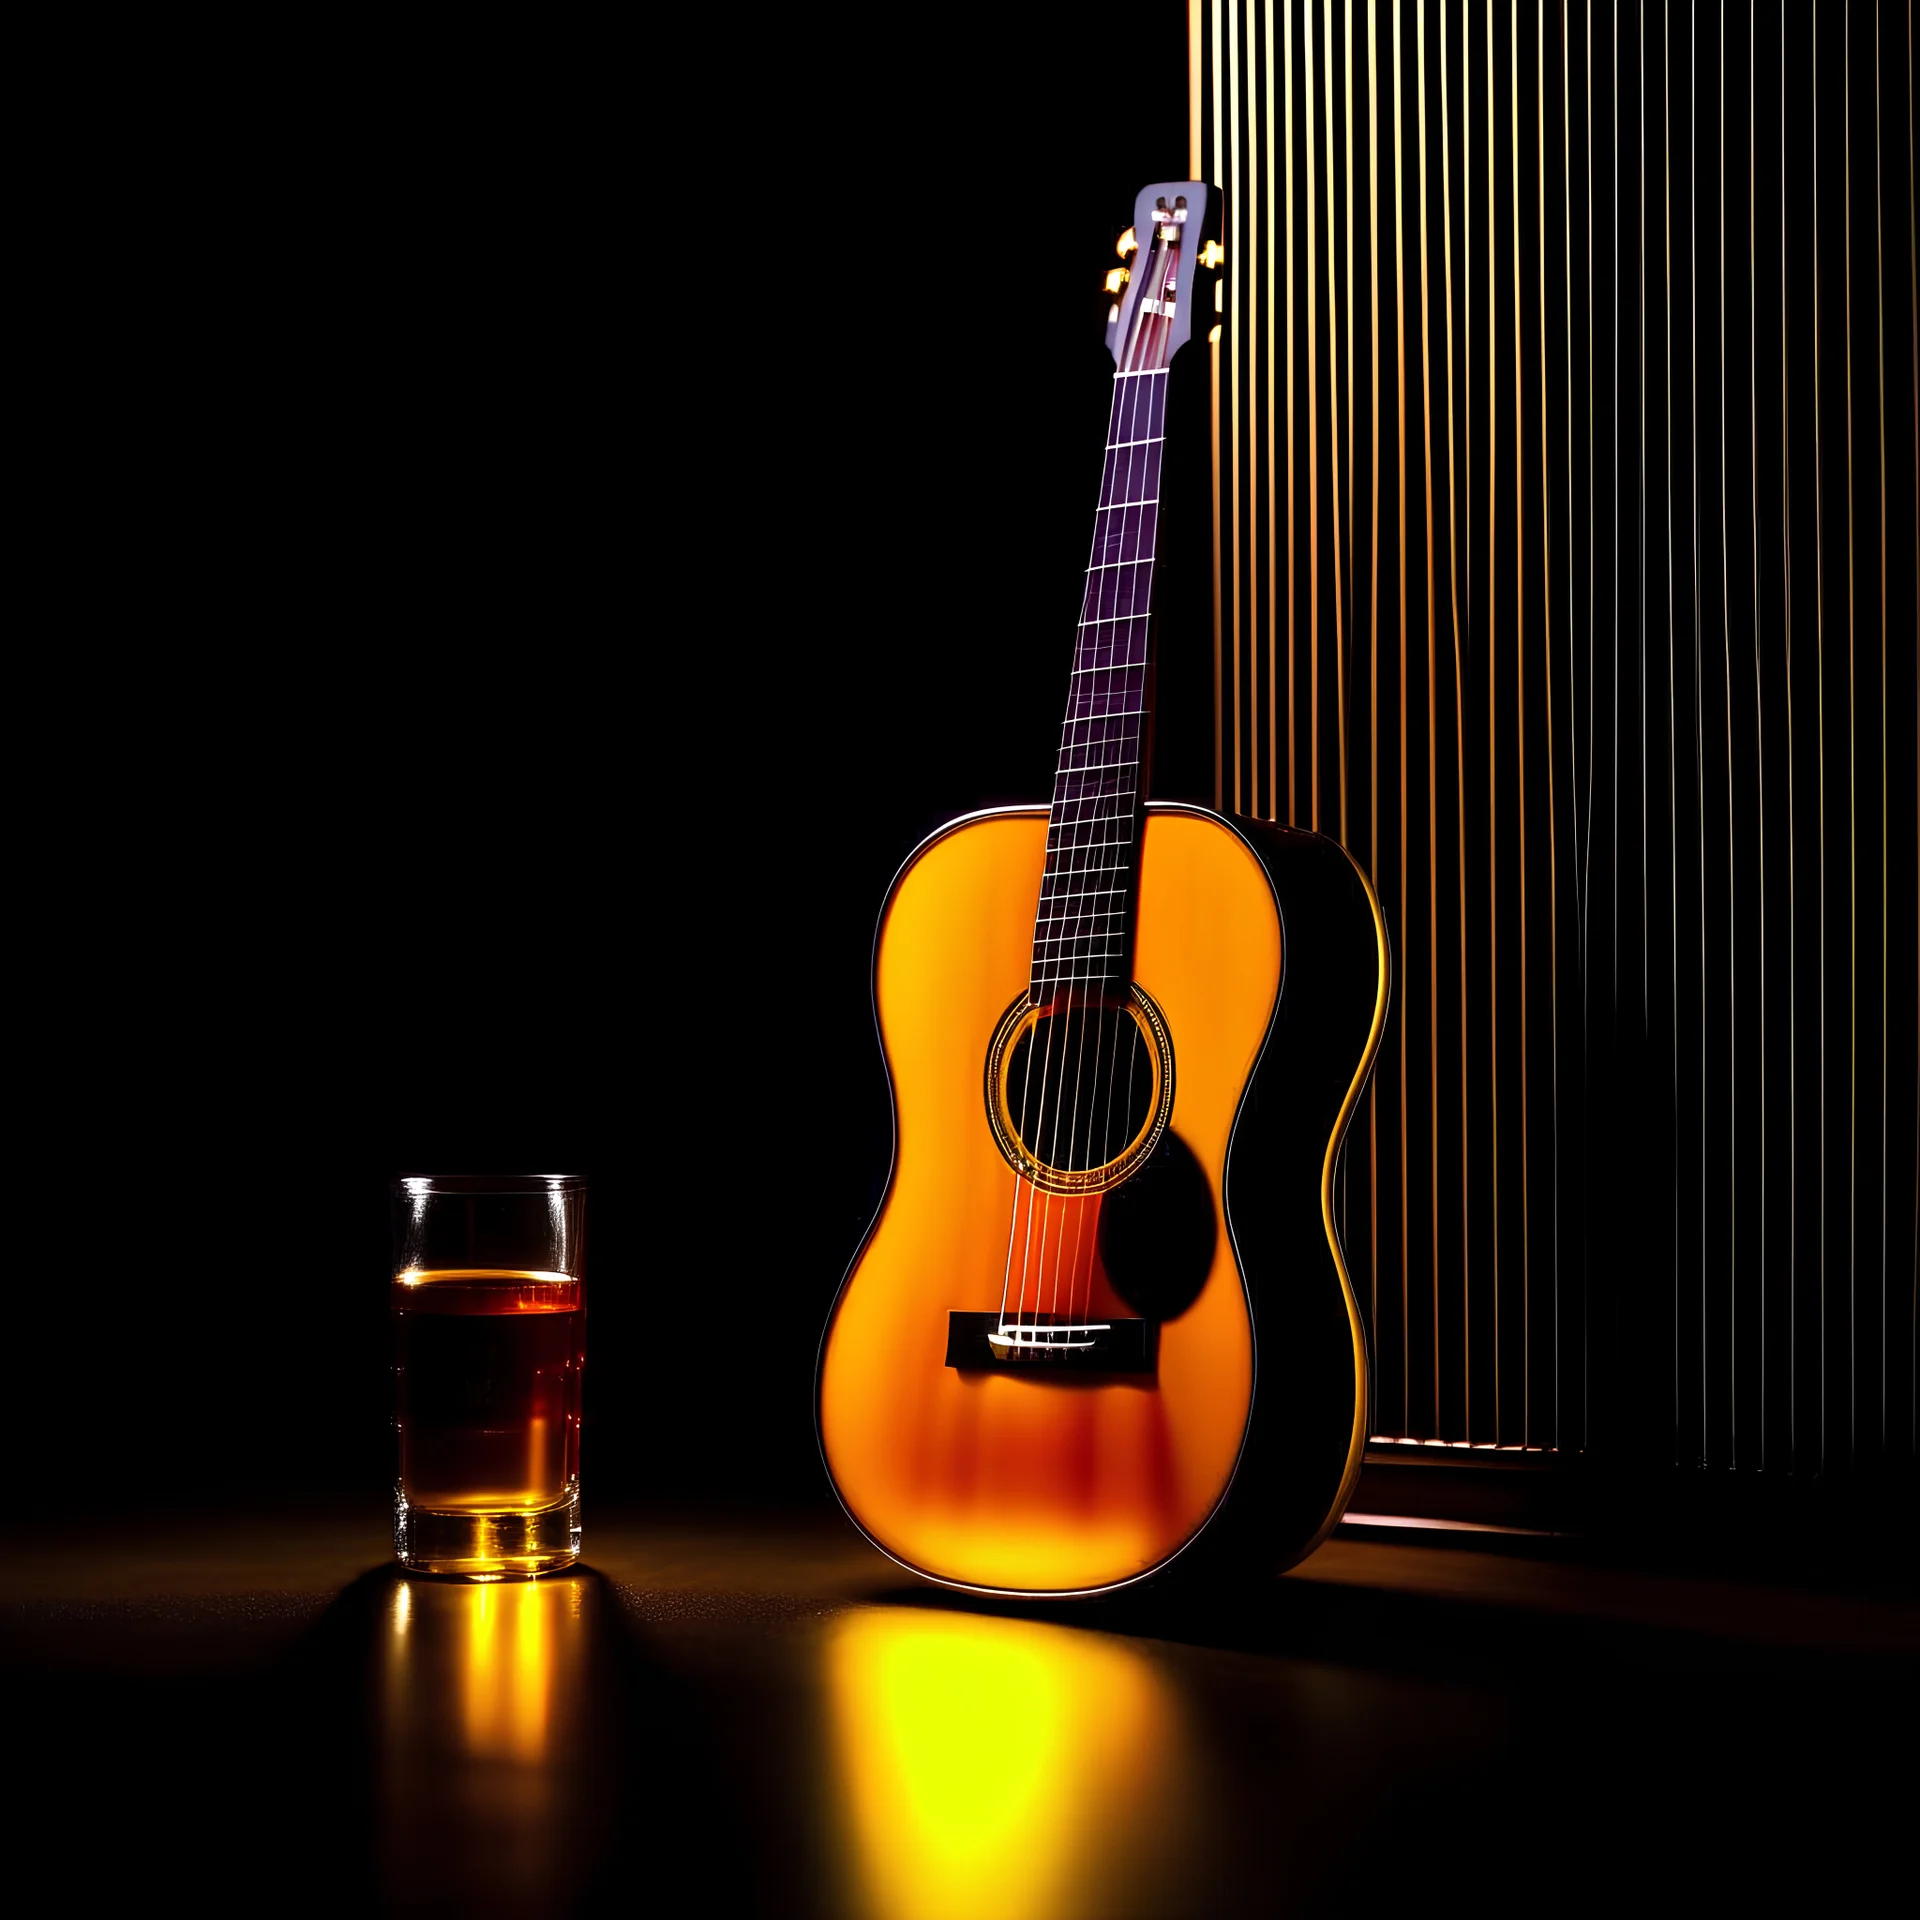 Acoustic guitar next to a glass of liquor in a dark space